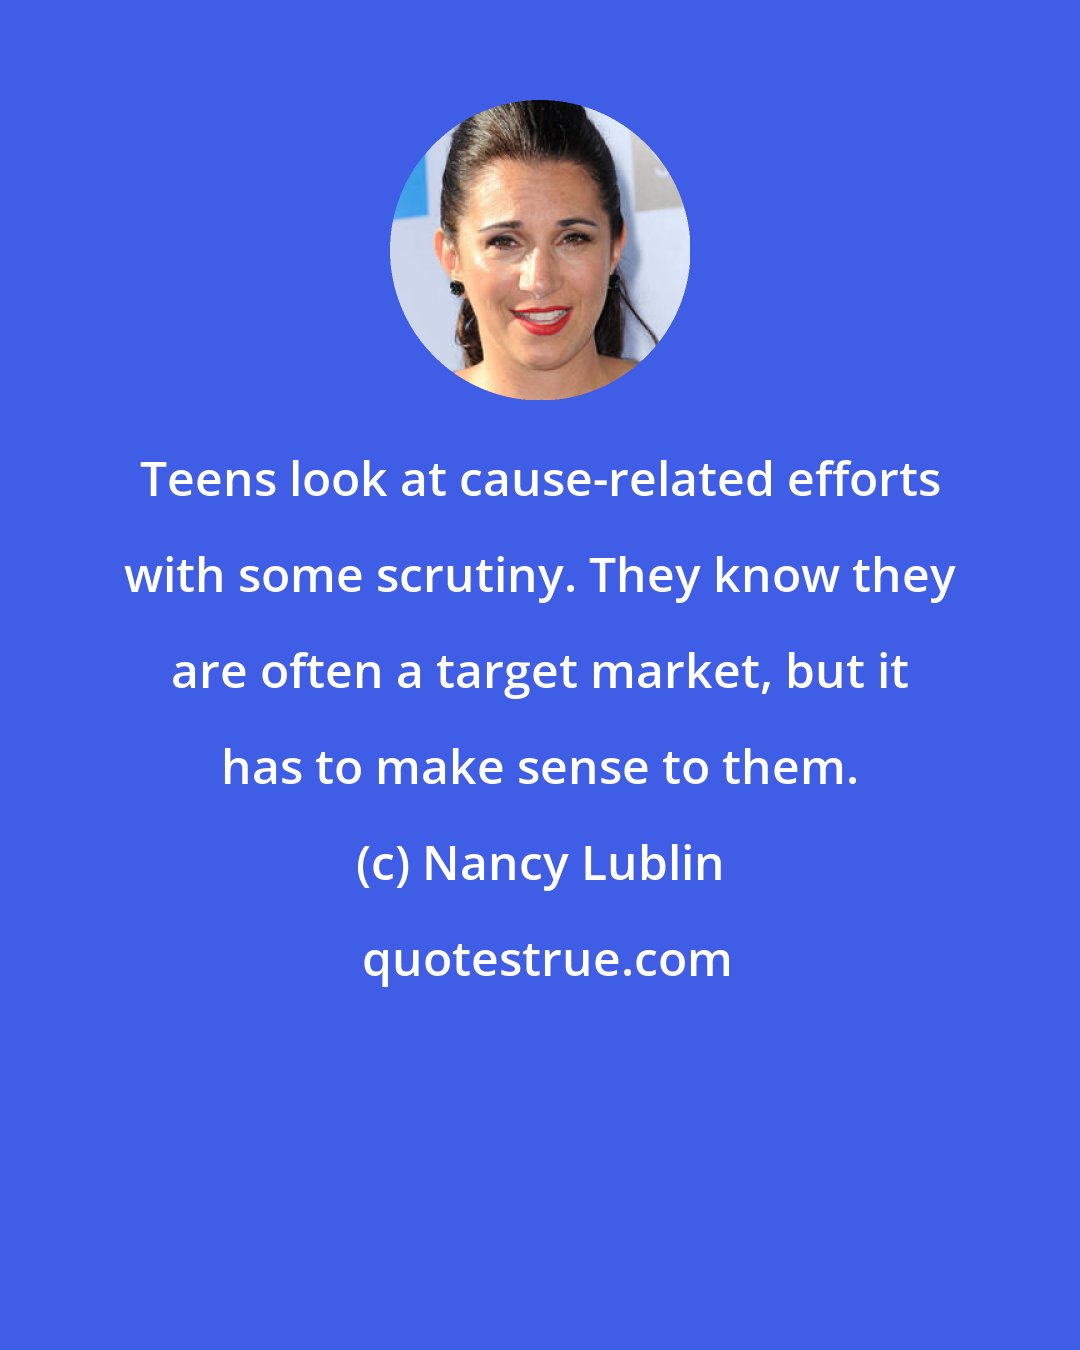 Nancy Lublin: Teens look at cause-related efforts with some scrutiny. They know they are often a target market, but it has to make sense to them.